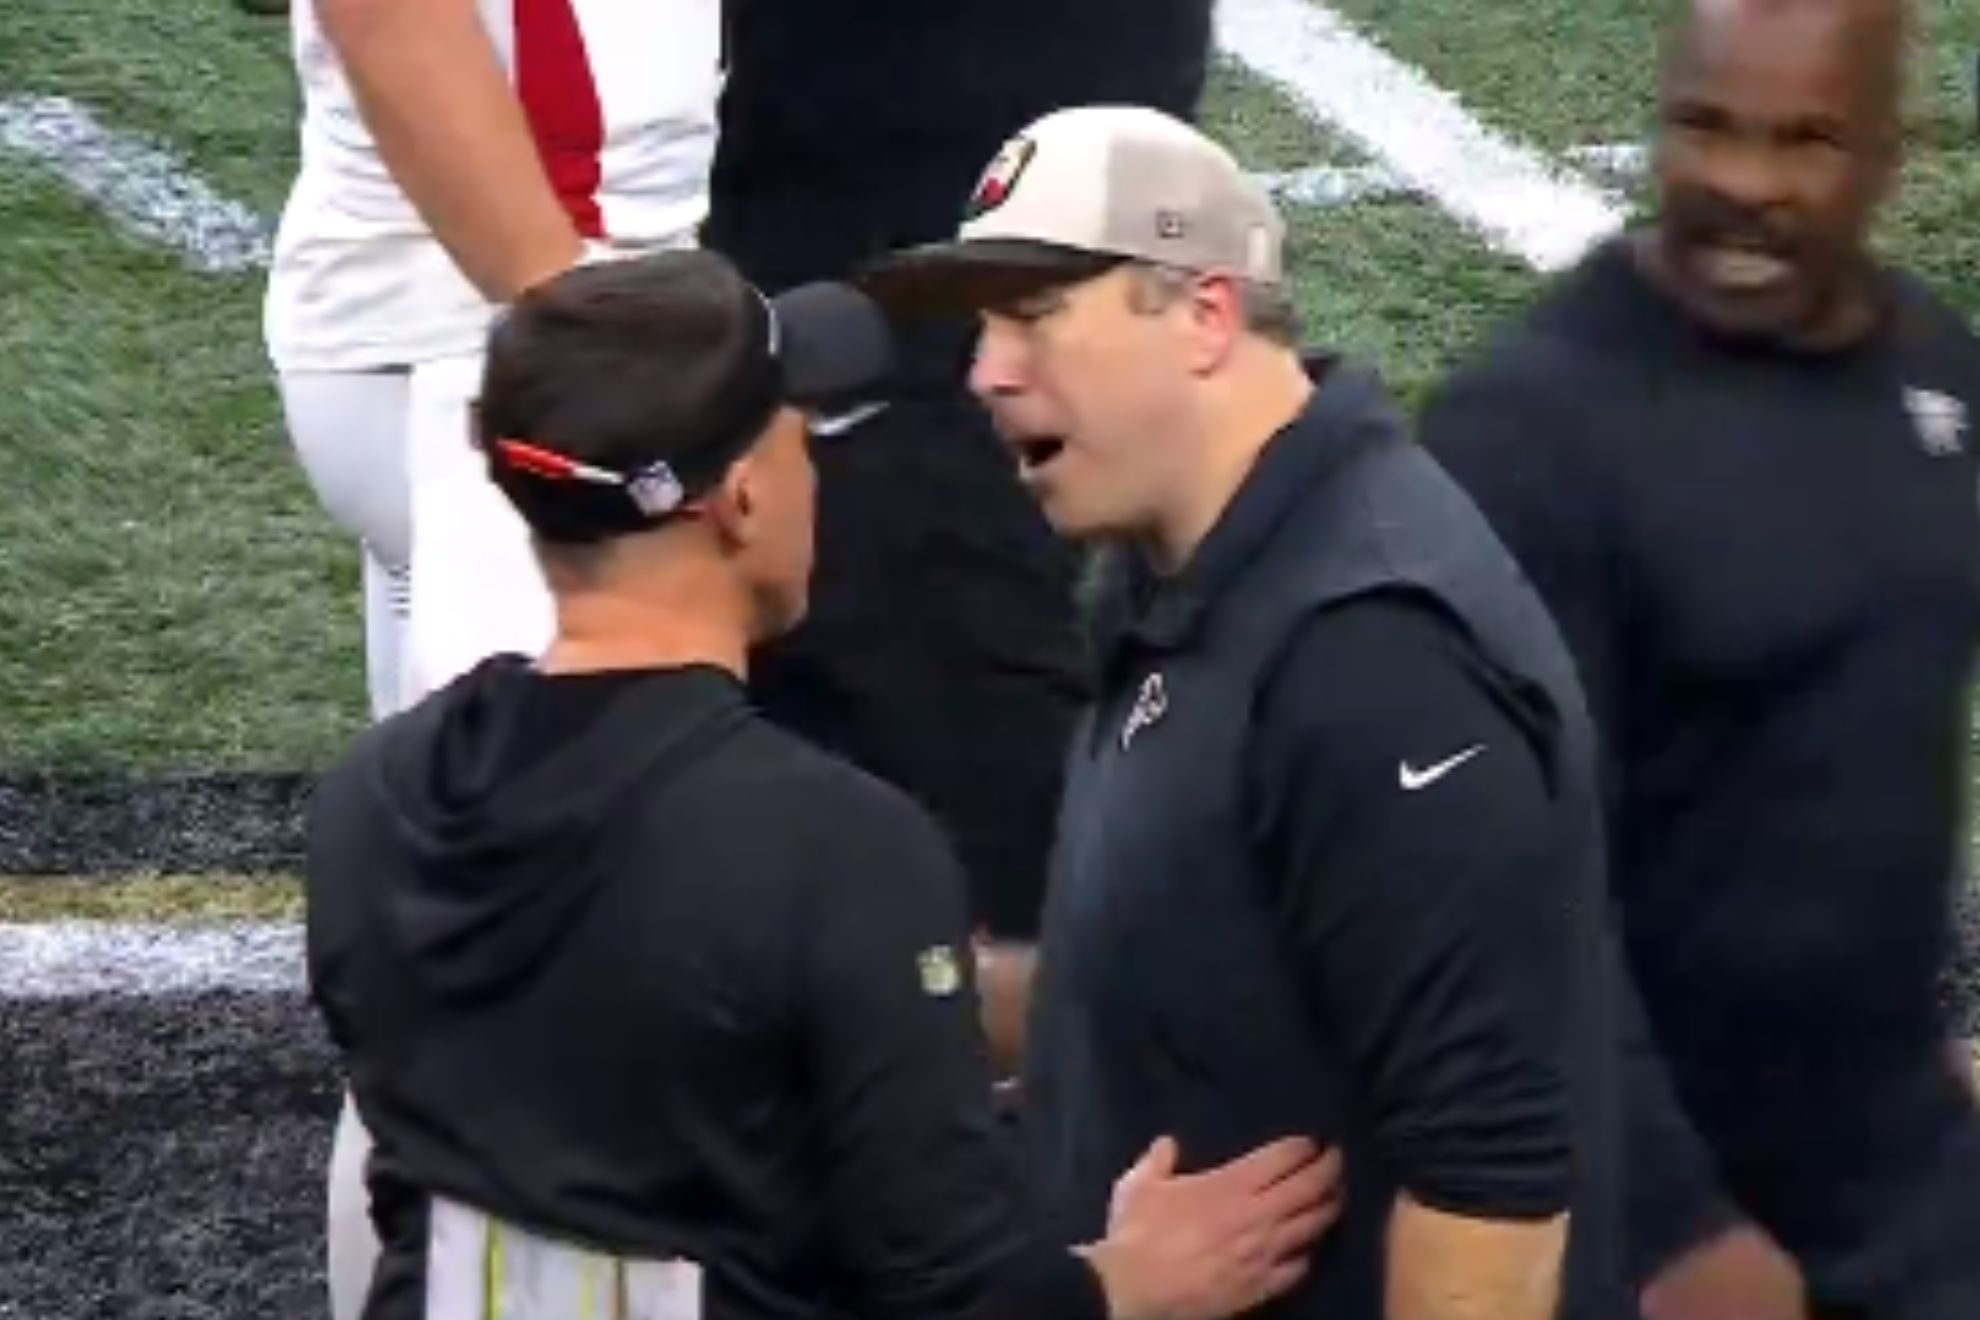 Why did Arthur Smith scream in Saints HC Dennis Allens face after Week 18 loss?